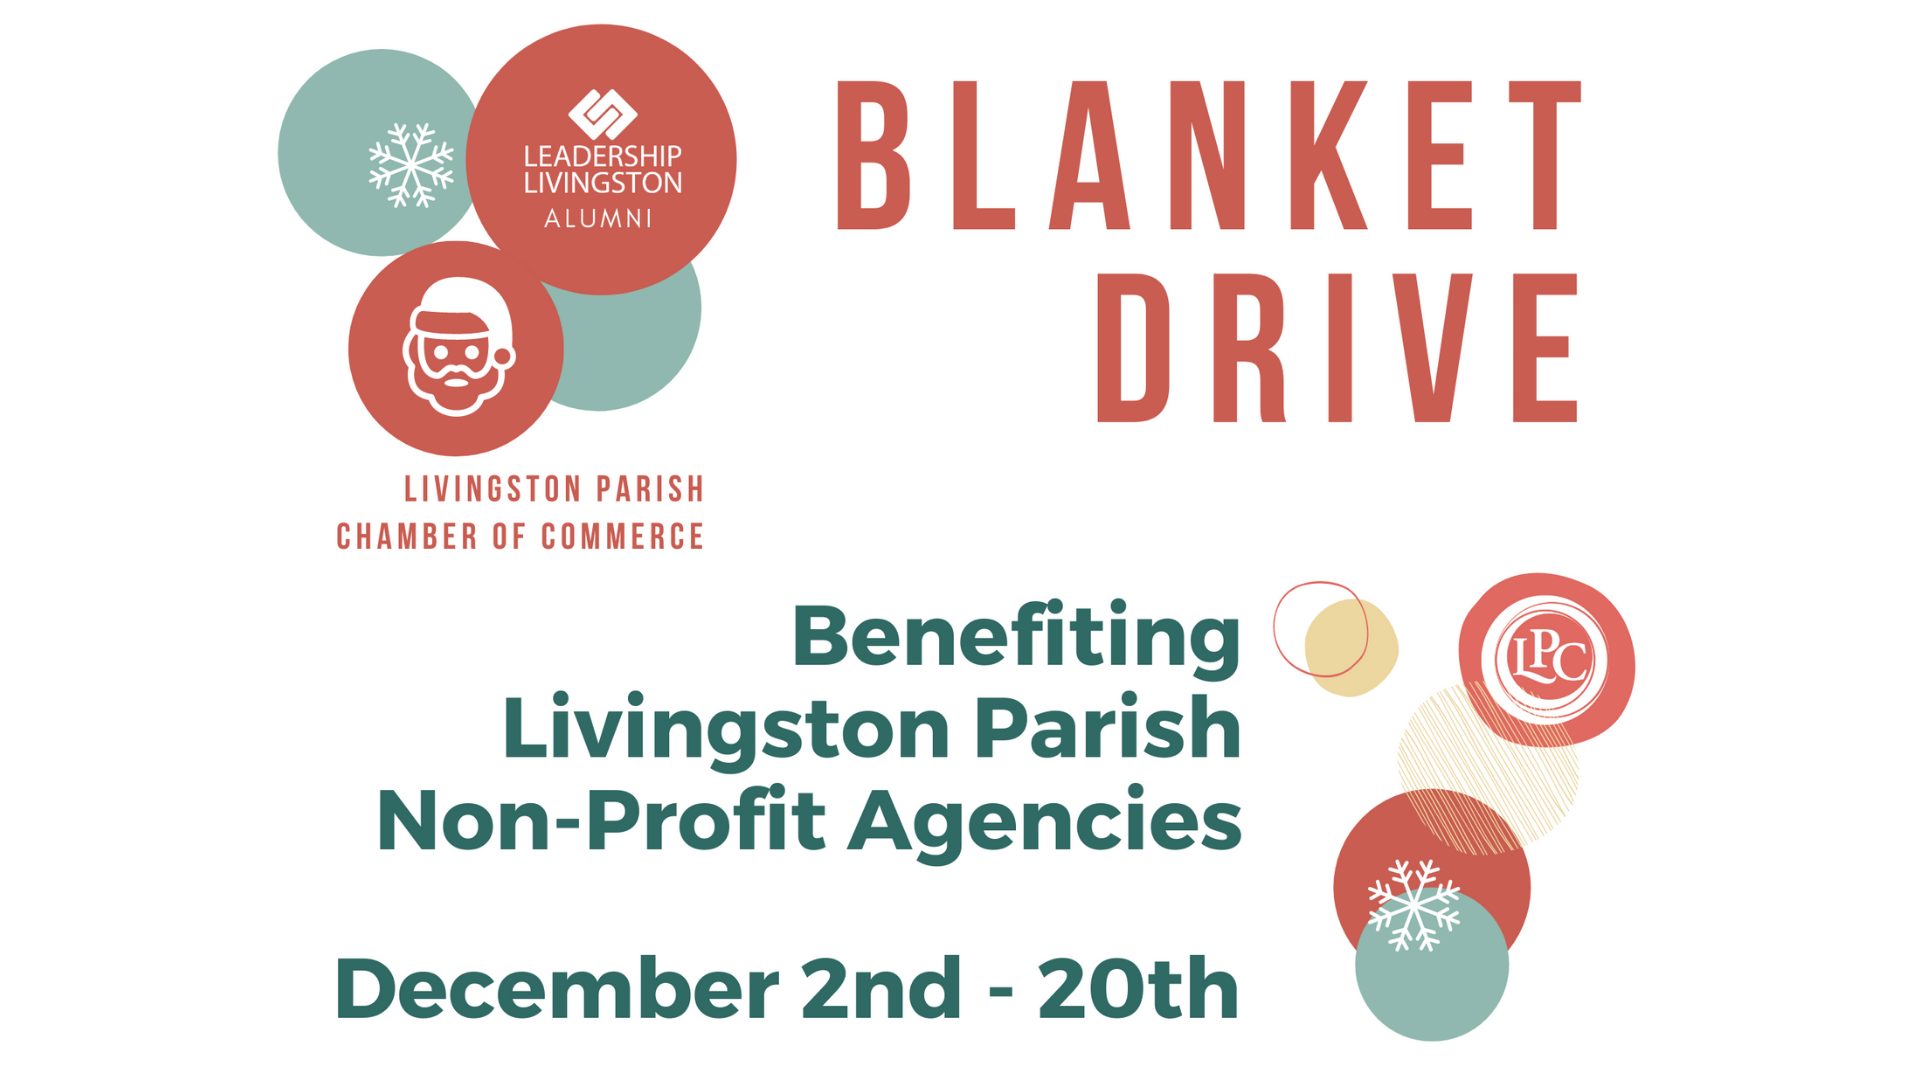 Blanket Drive for Home Page